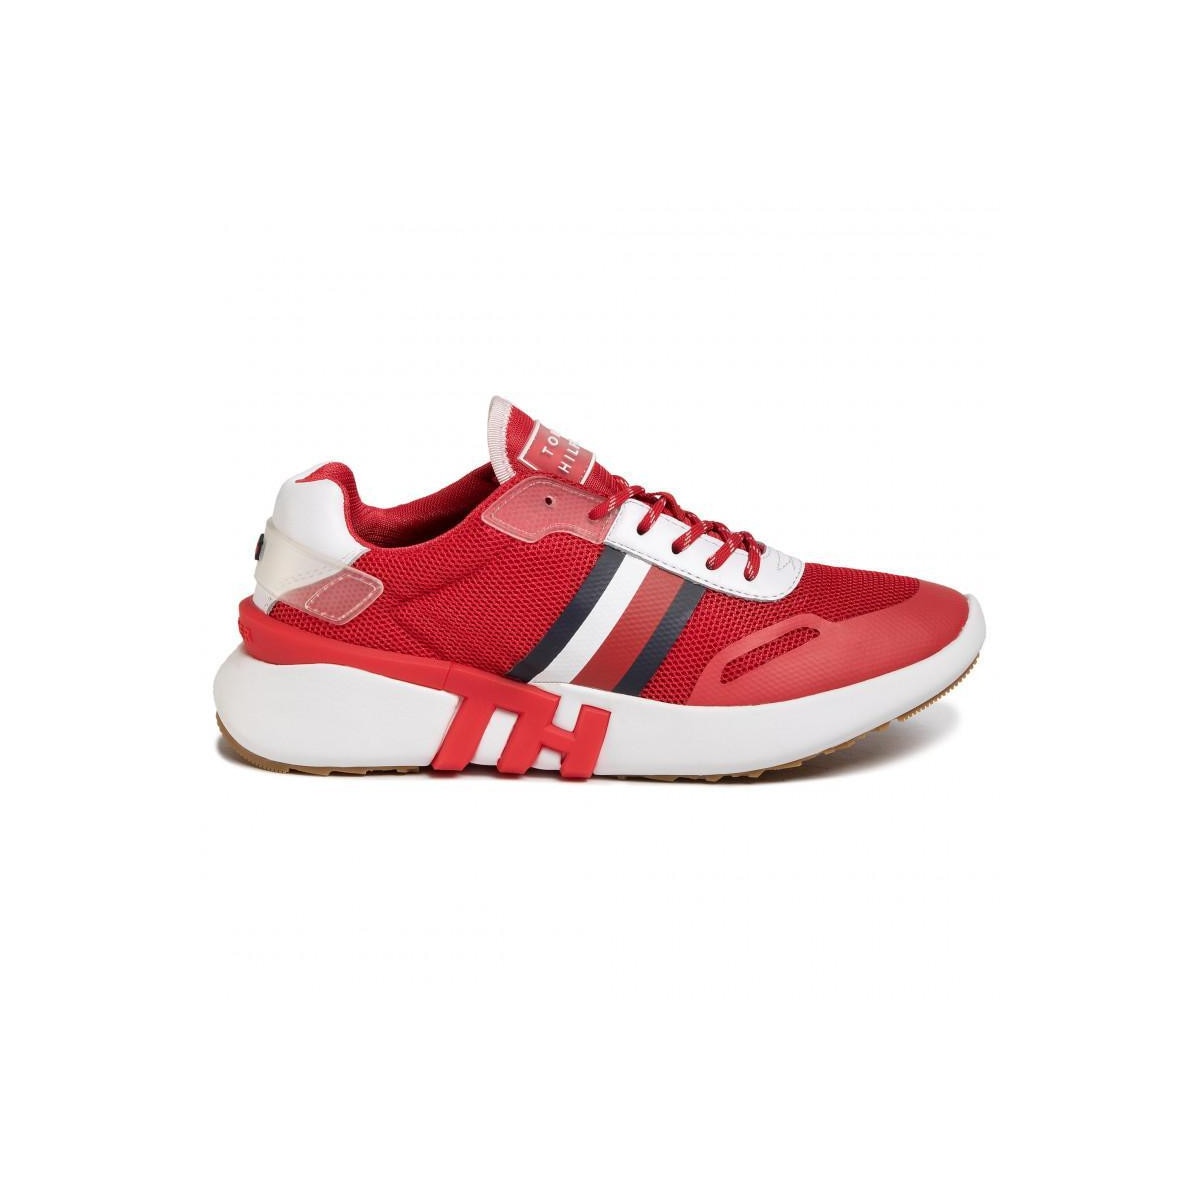 I want professional declare Pantofi sport dama, Tommy Hilfiger, Tommy Sporty Branded Runner Sneakers,  Piele naturala, Rosu - eMAG.ro